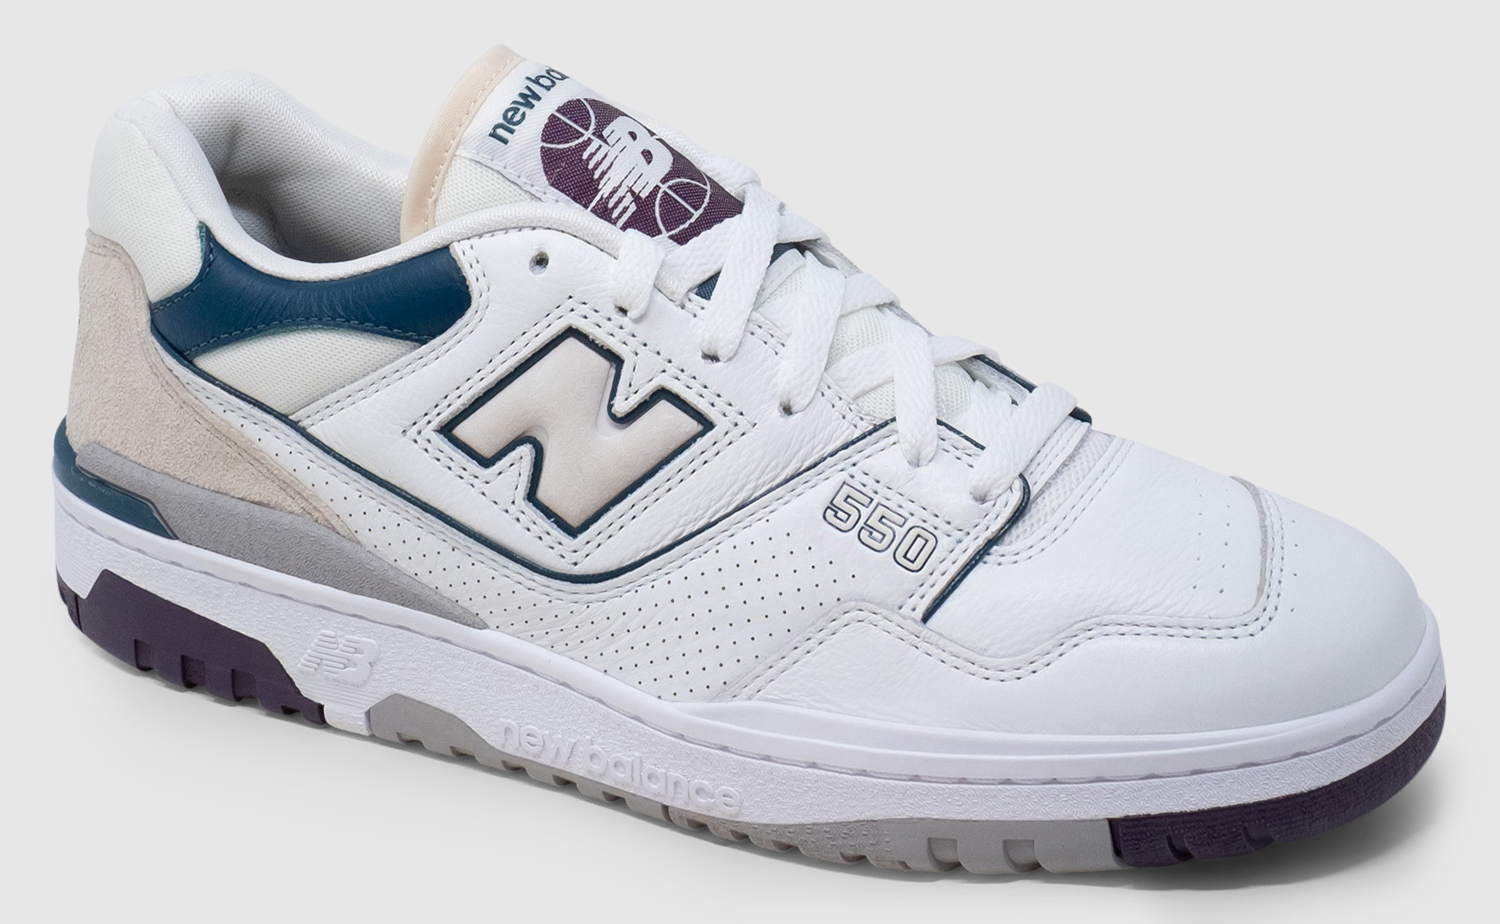 New Balance BB550 Leather - white-petrol | Footsteps